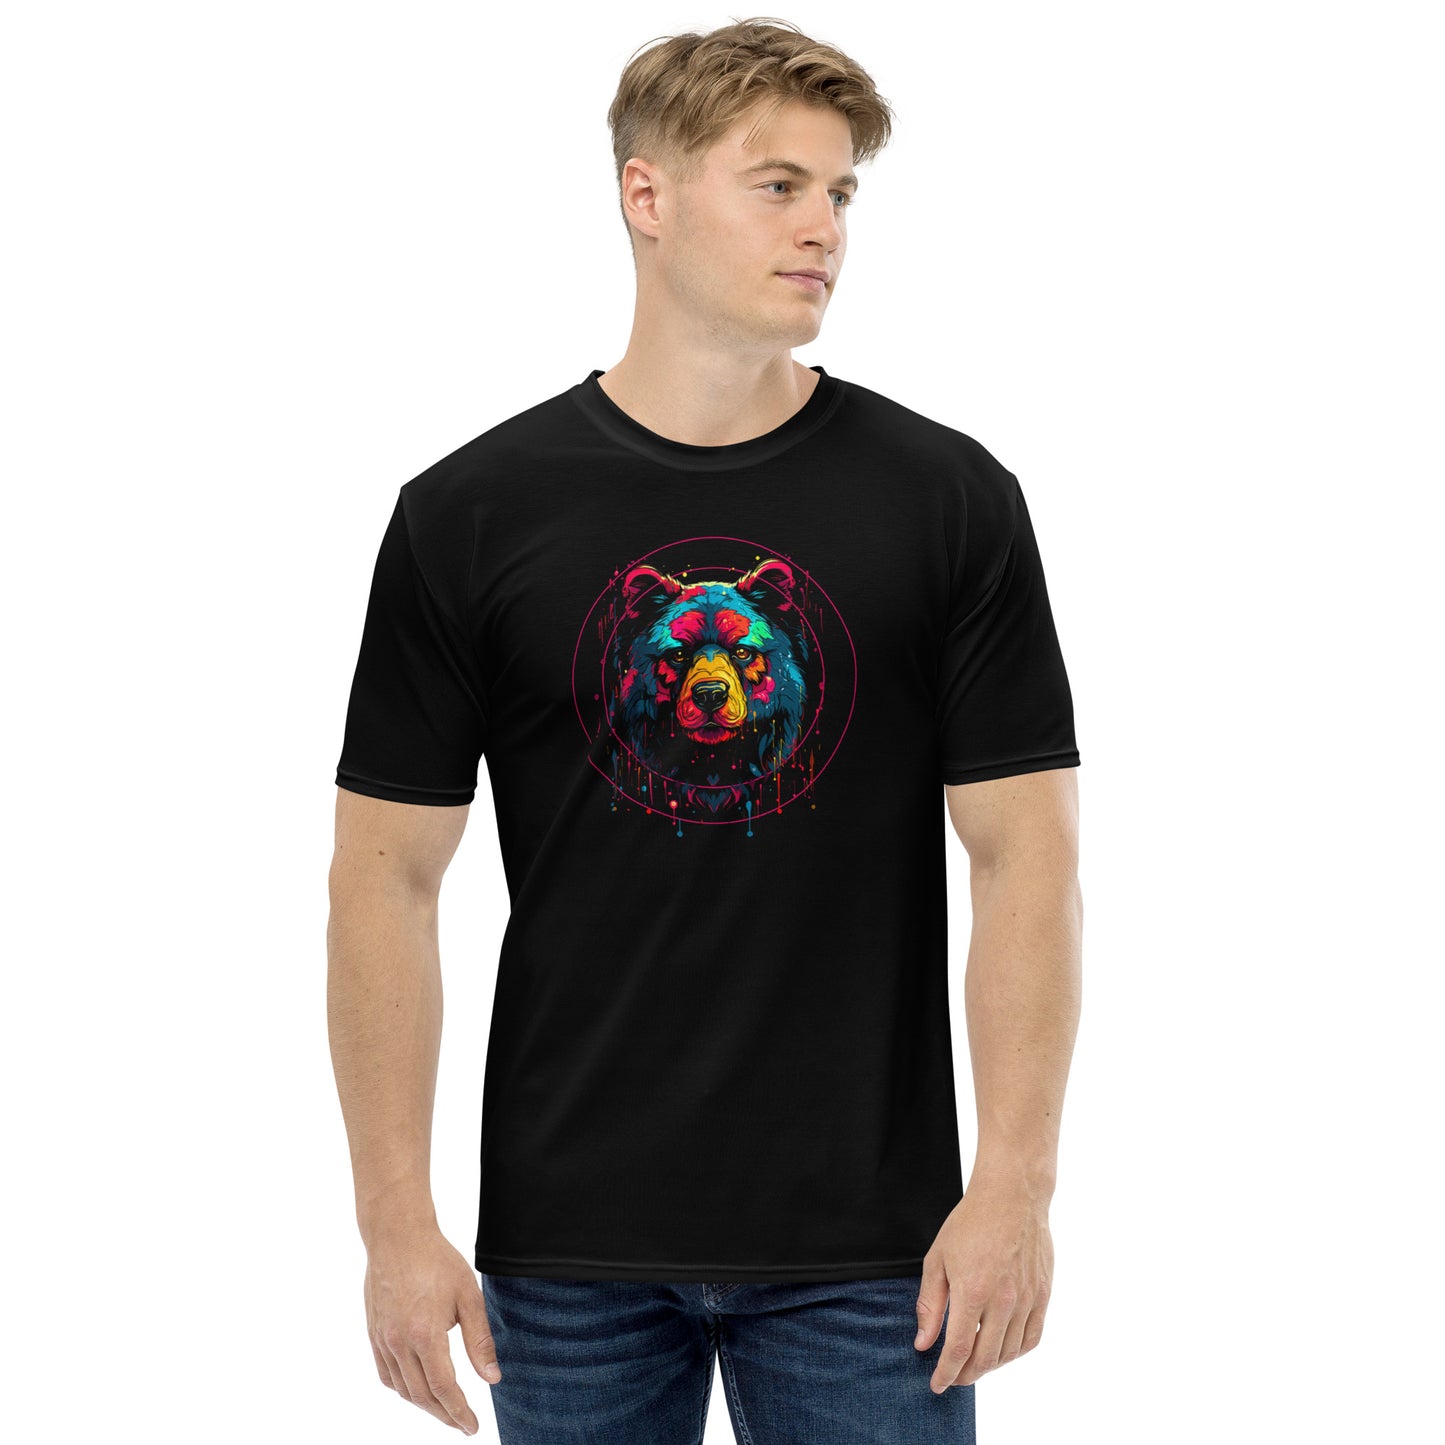 Wearing It Out Bear Logo All Over Print Men's t-shirt